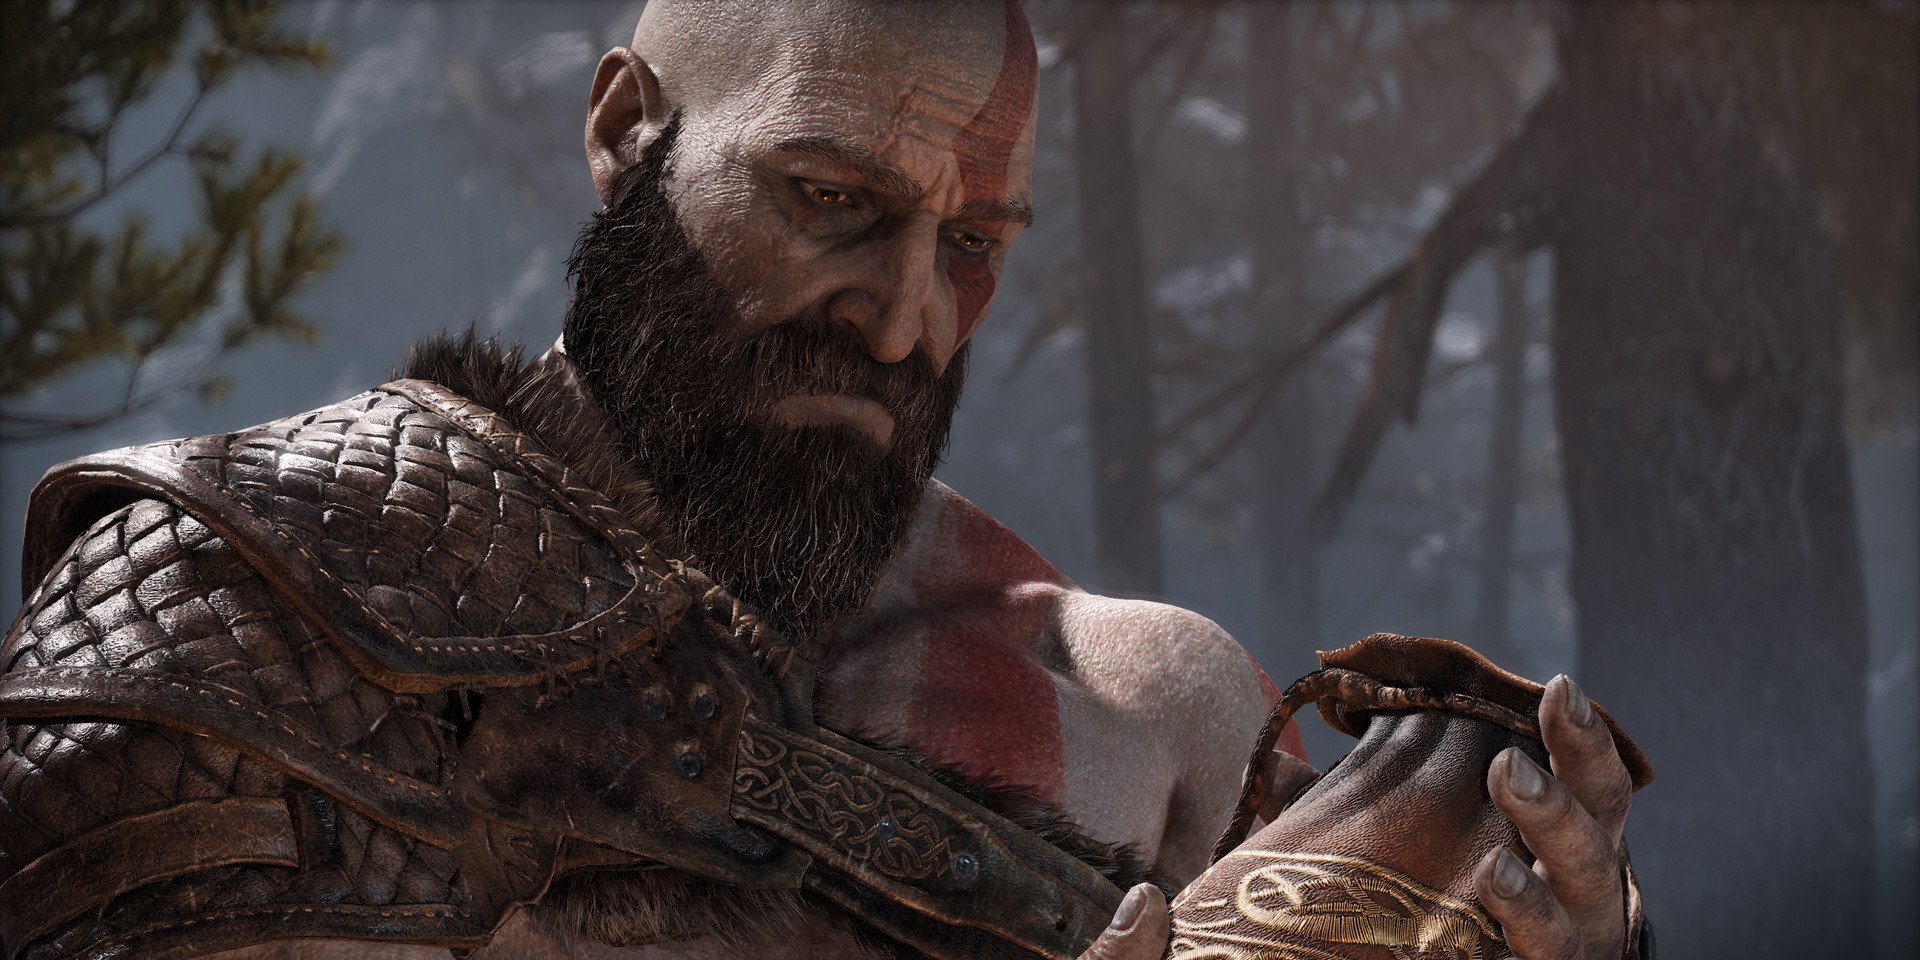 Sony shared details of the upcoming release of God of War on the PC platform